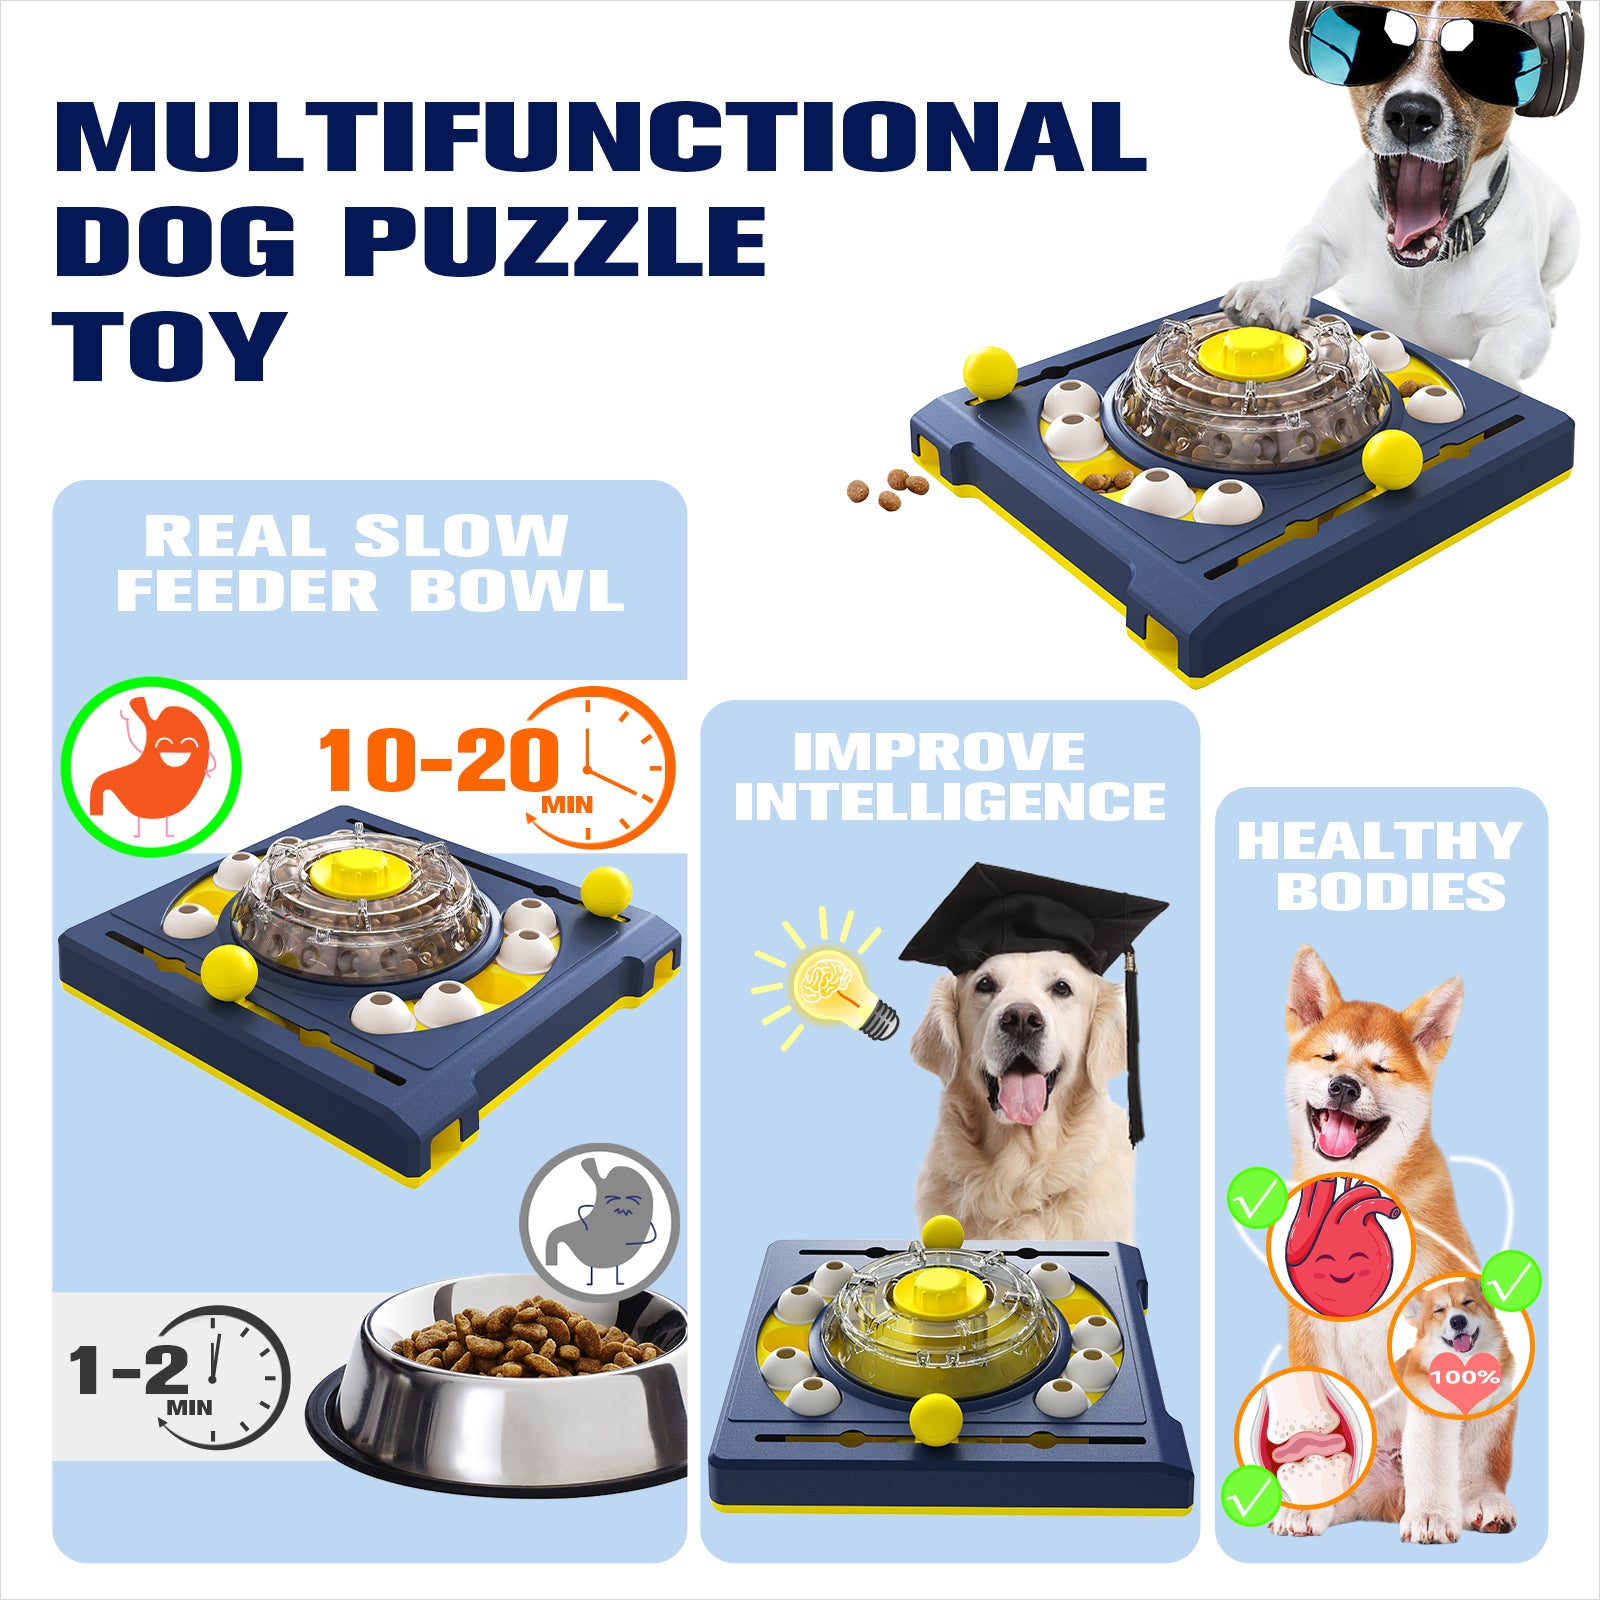 KADTC Dog Puzzle Toys for Medium/Small Dogs Slow Blow Puzzles